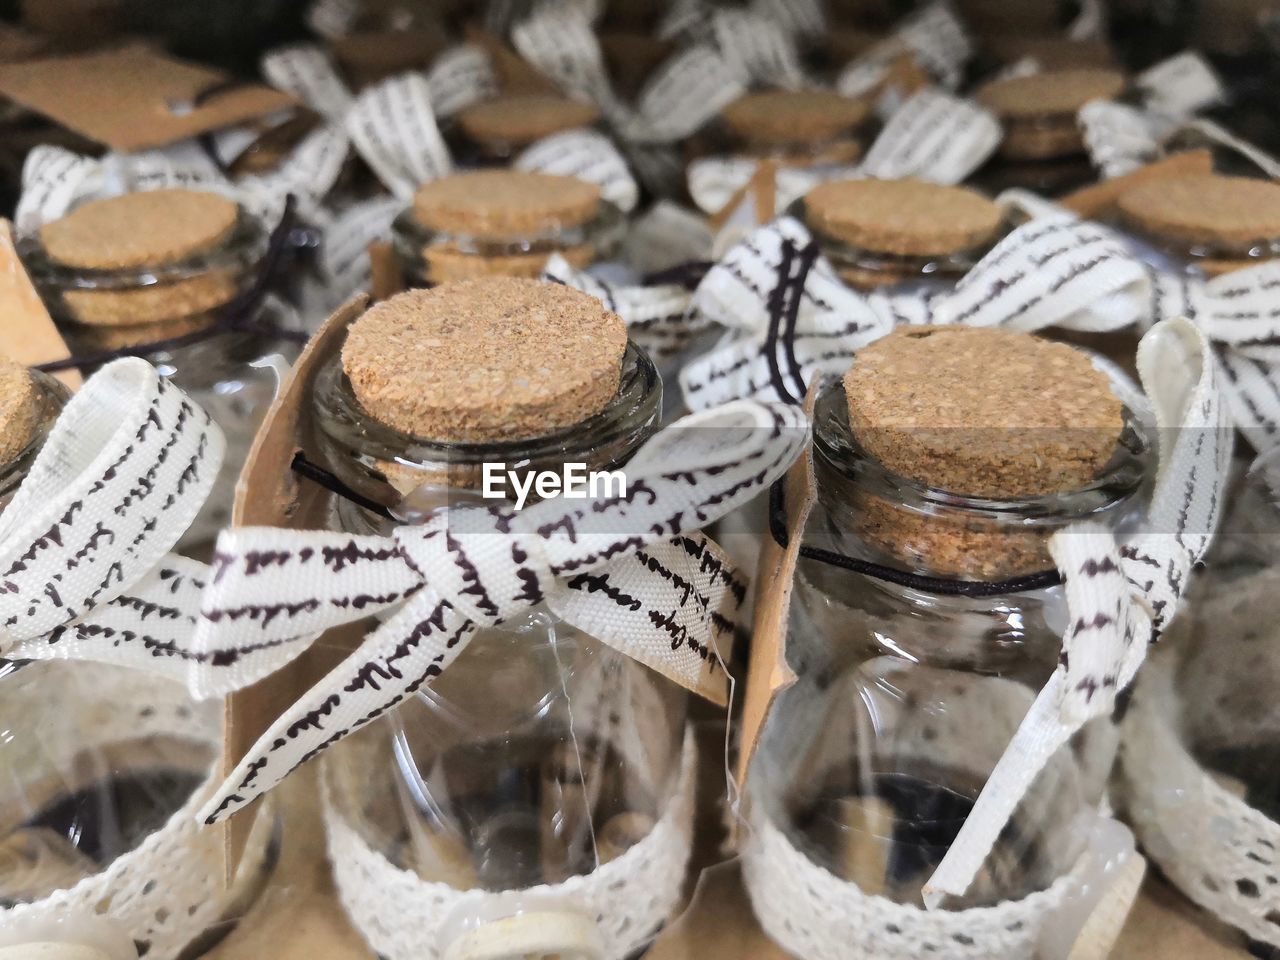 Close-up of ribbons on jars